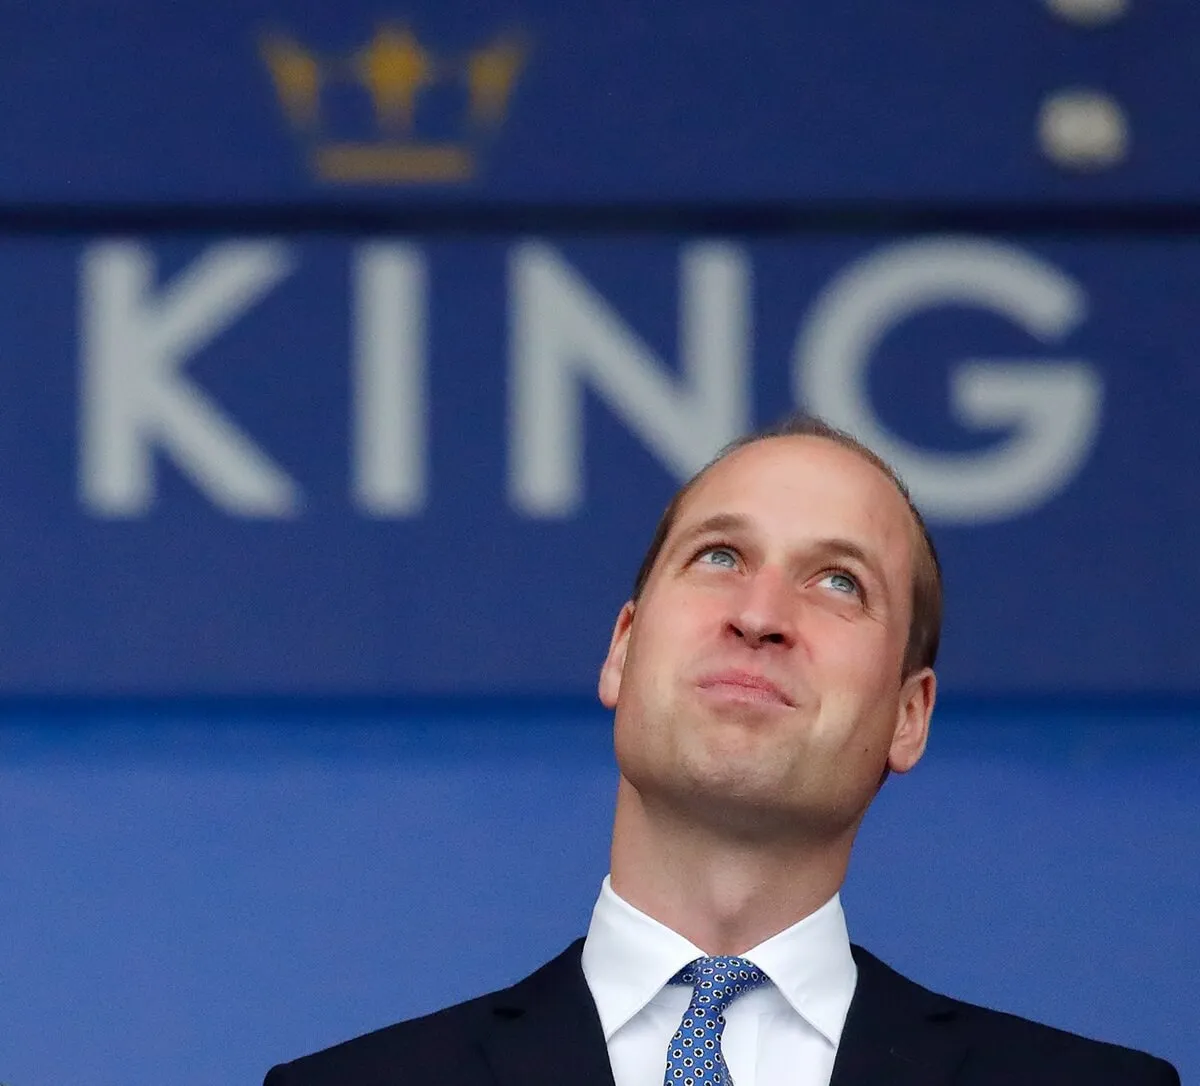 Prince William visits Leicester City Football Club's King Power Stadium